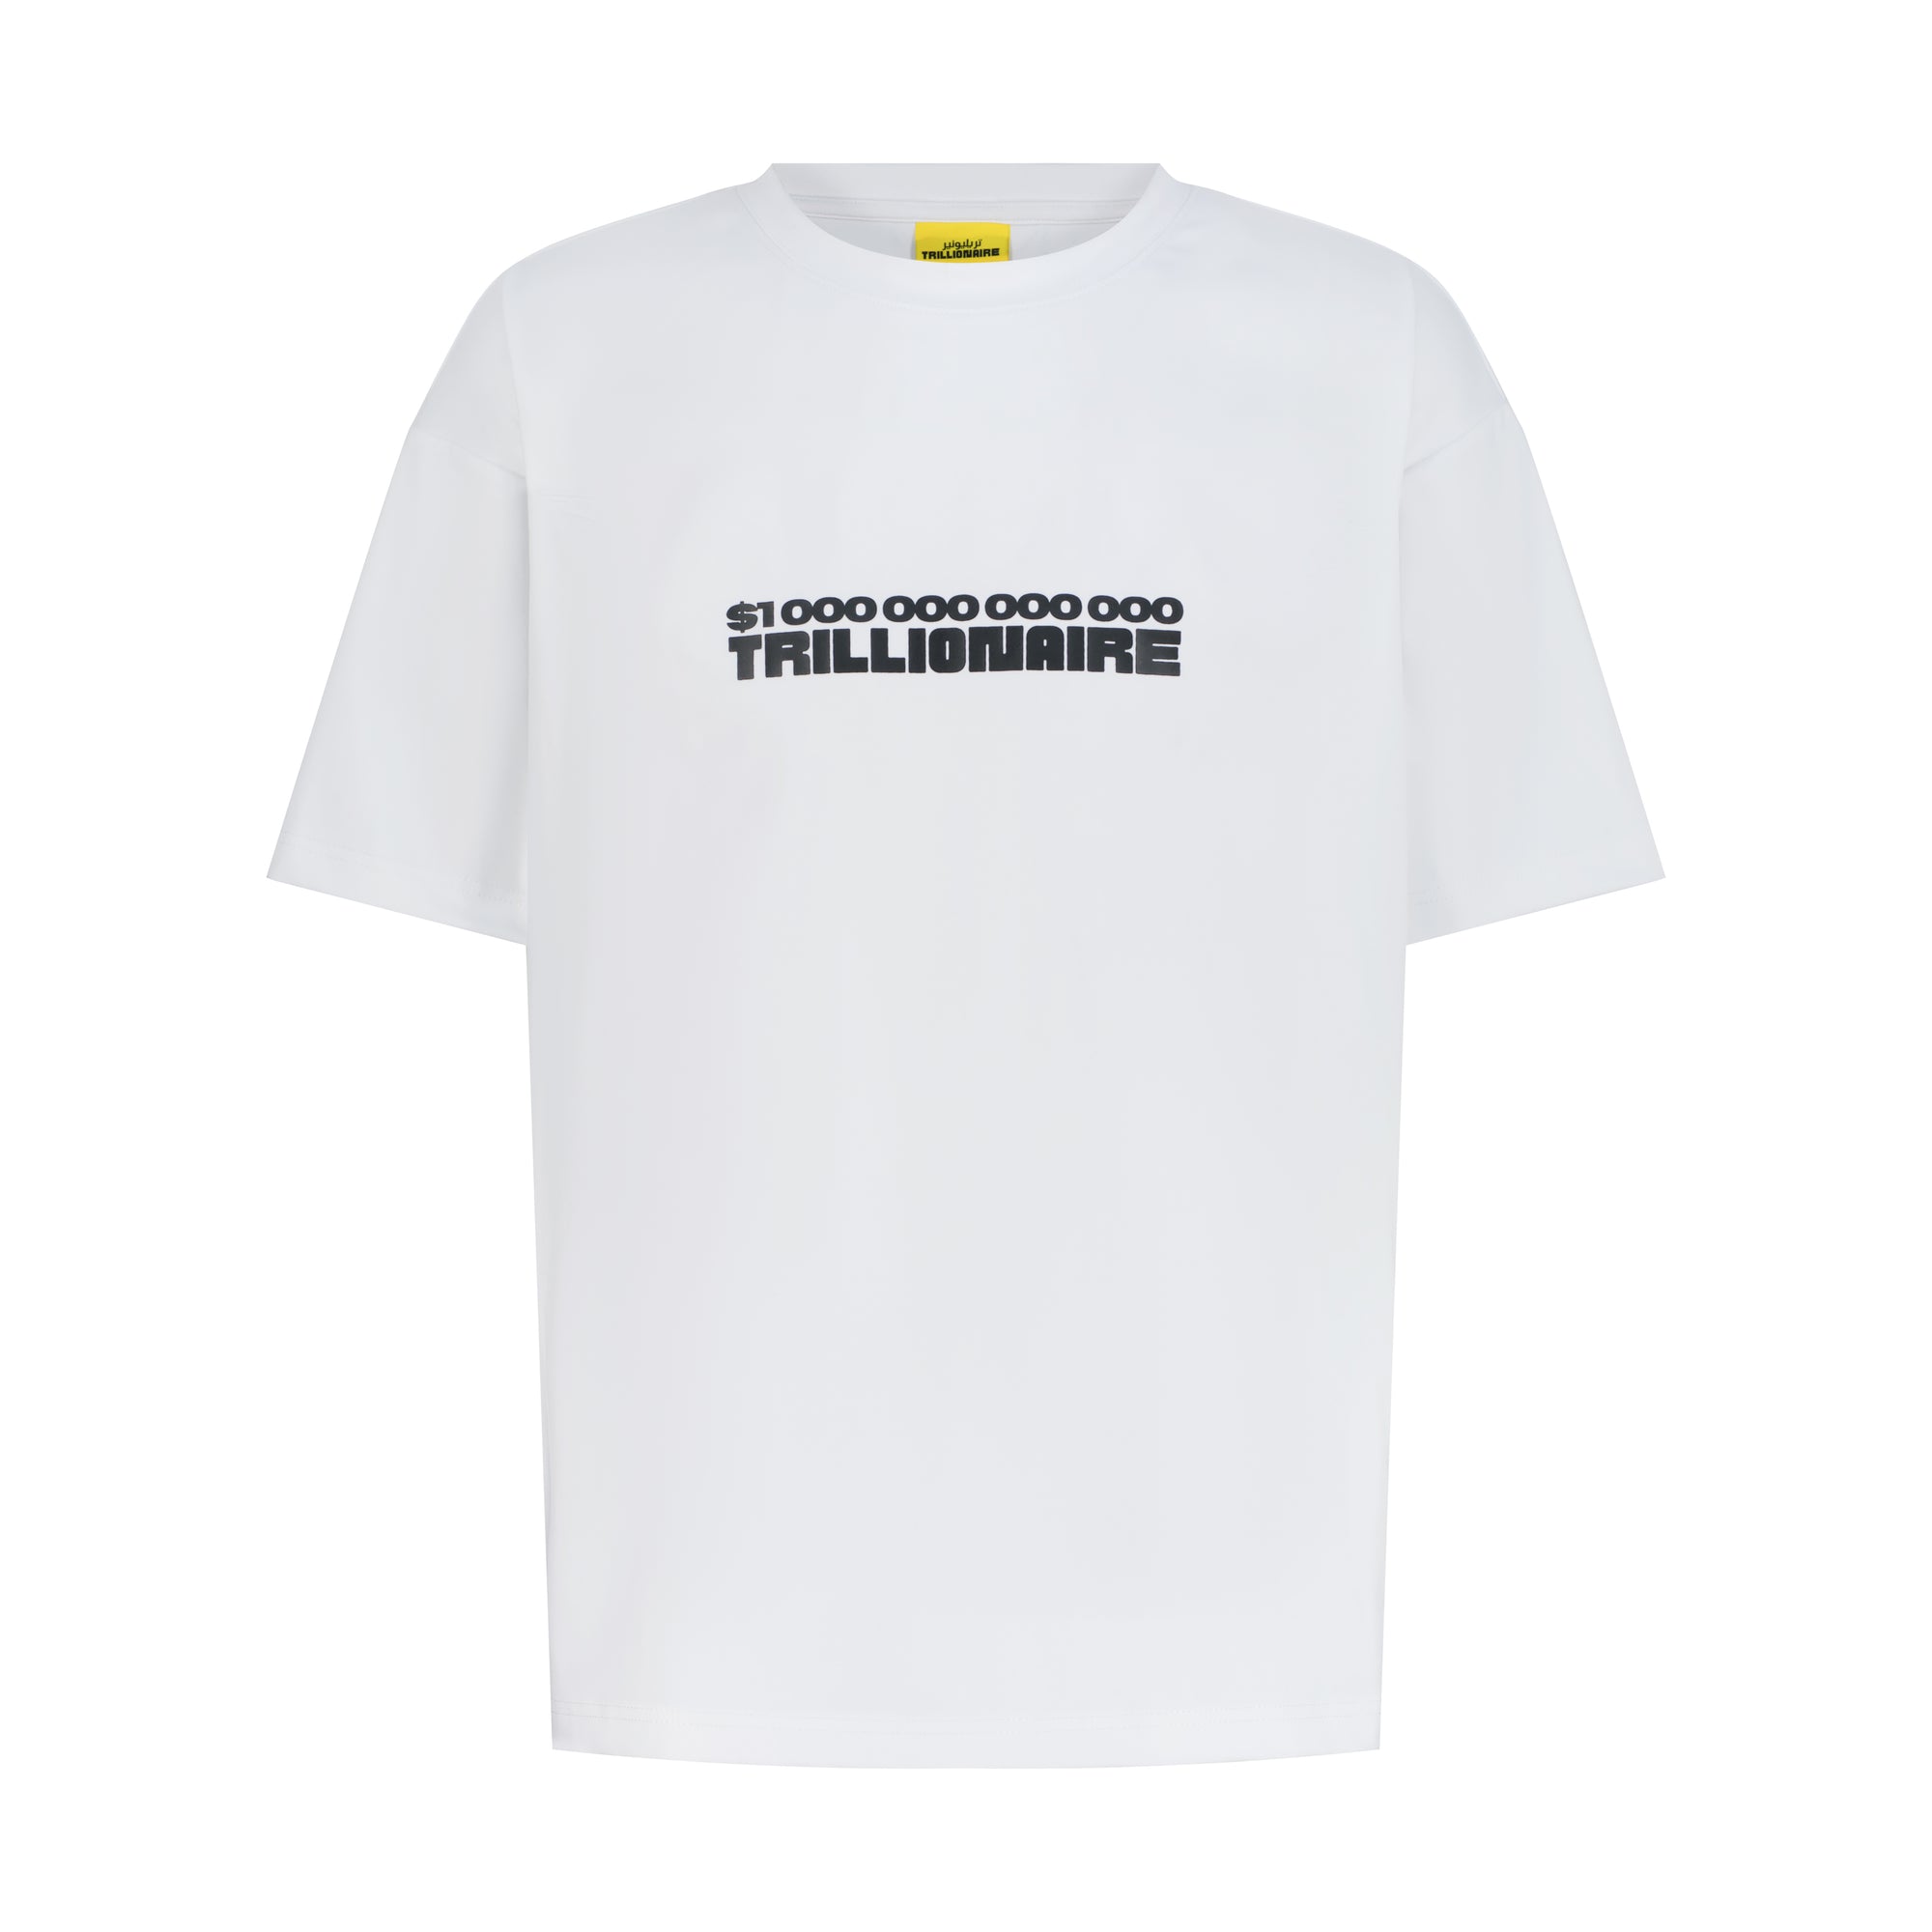 The Trillionaire Clothing